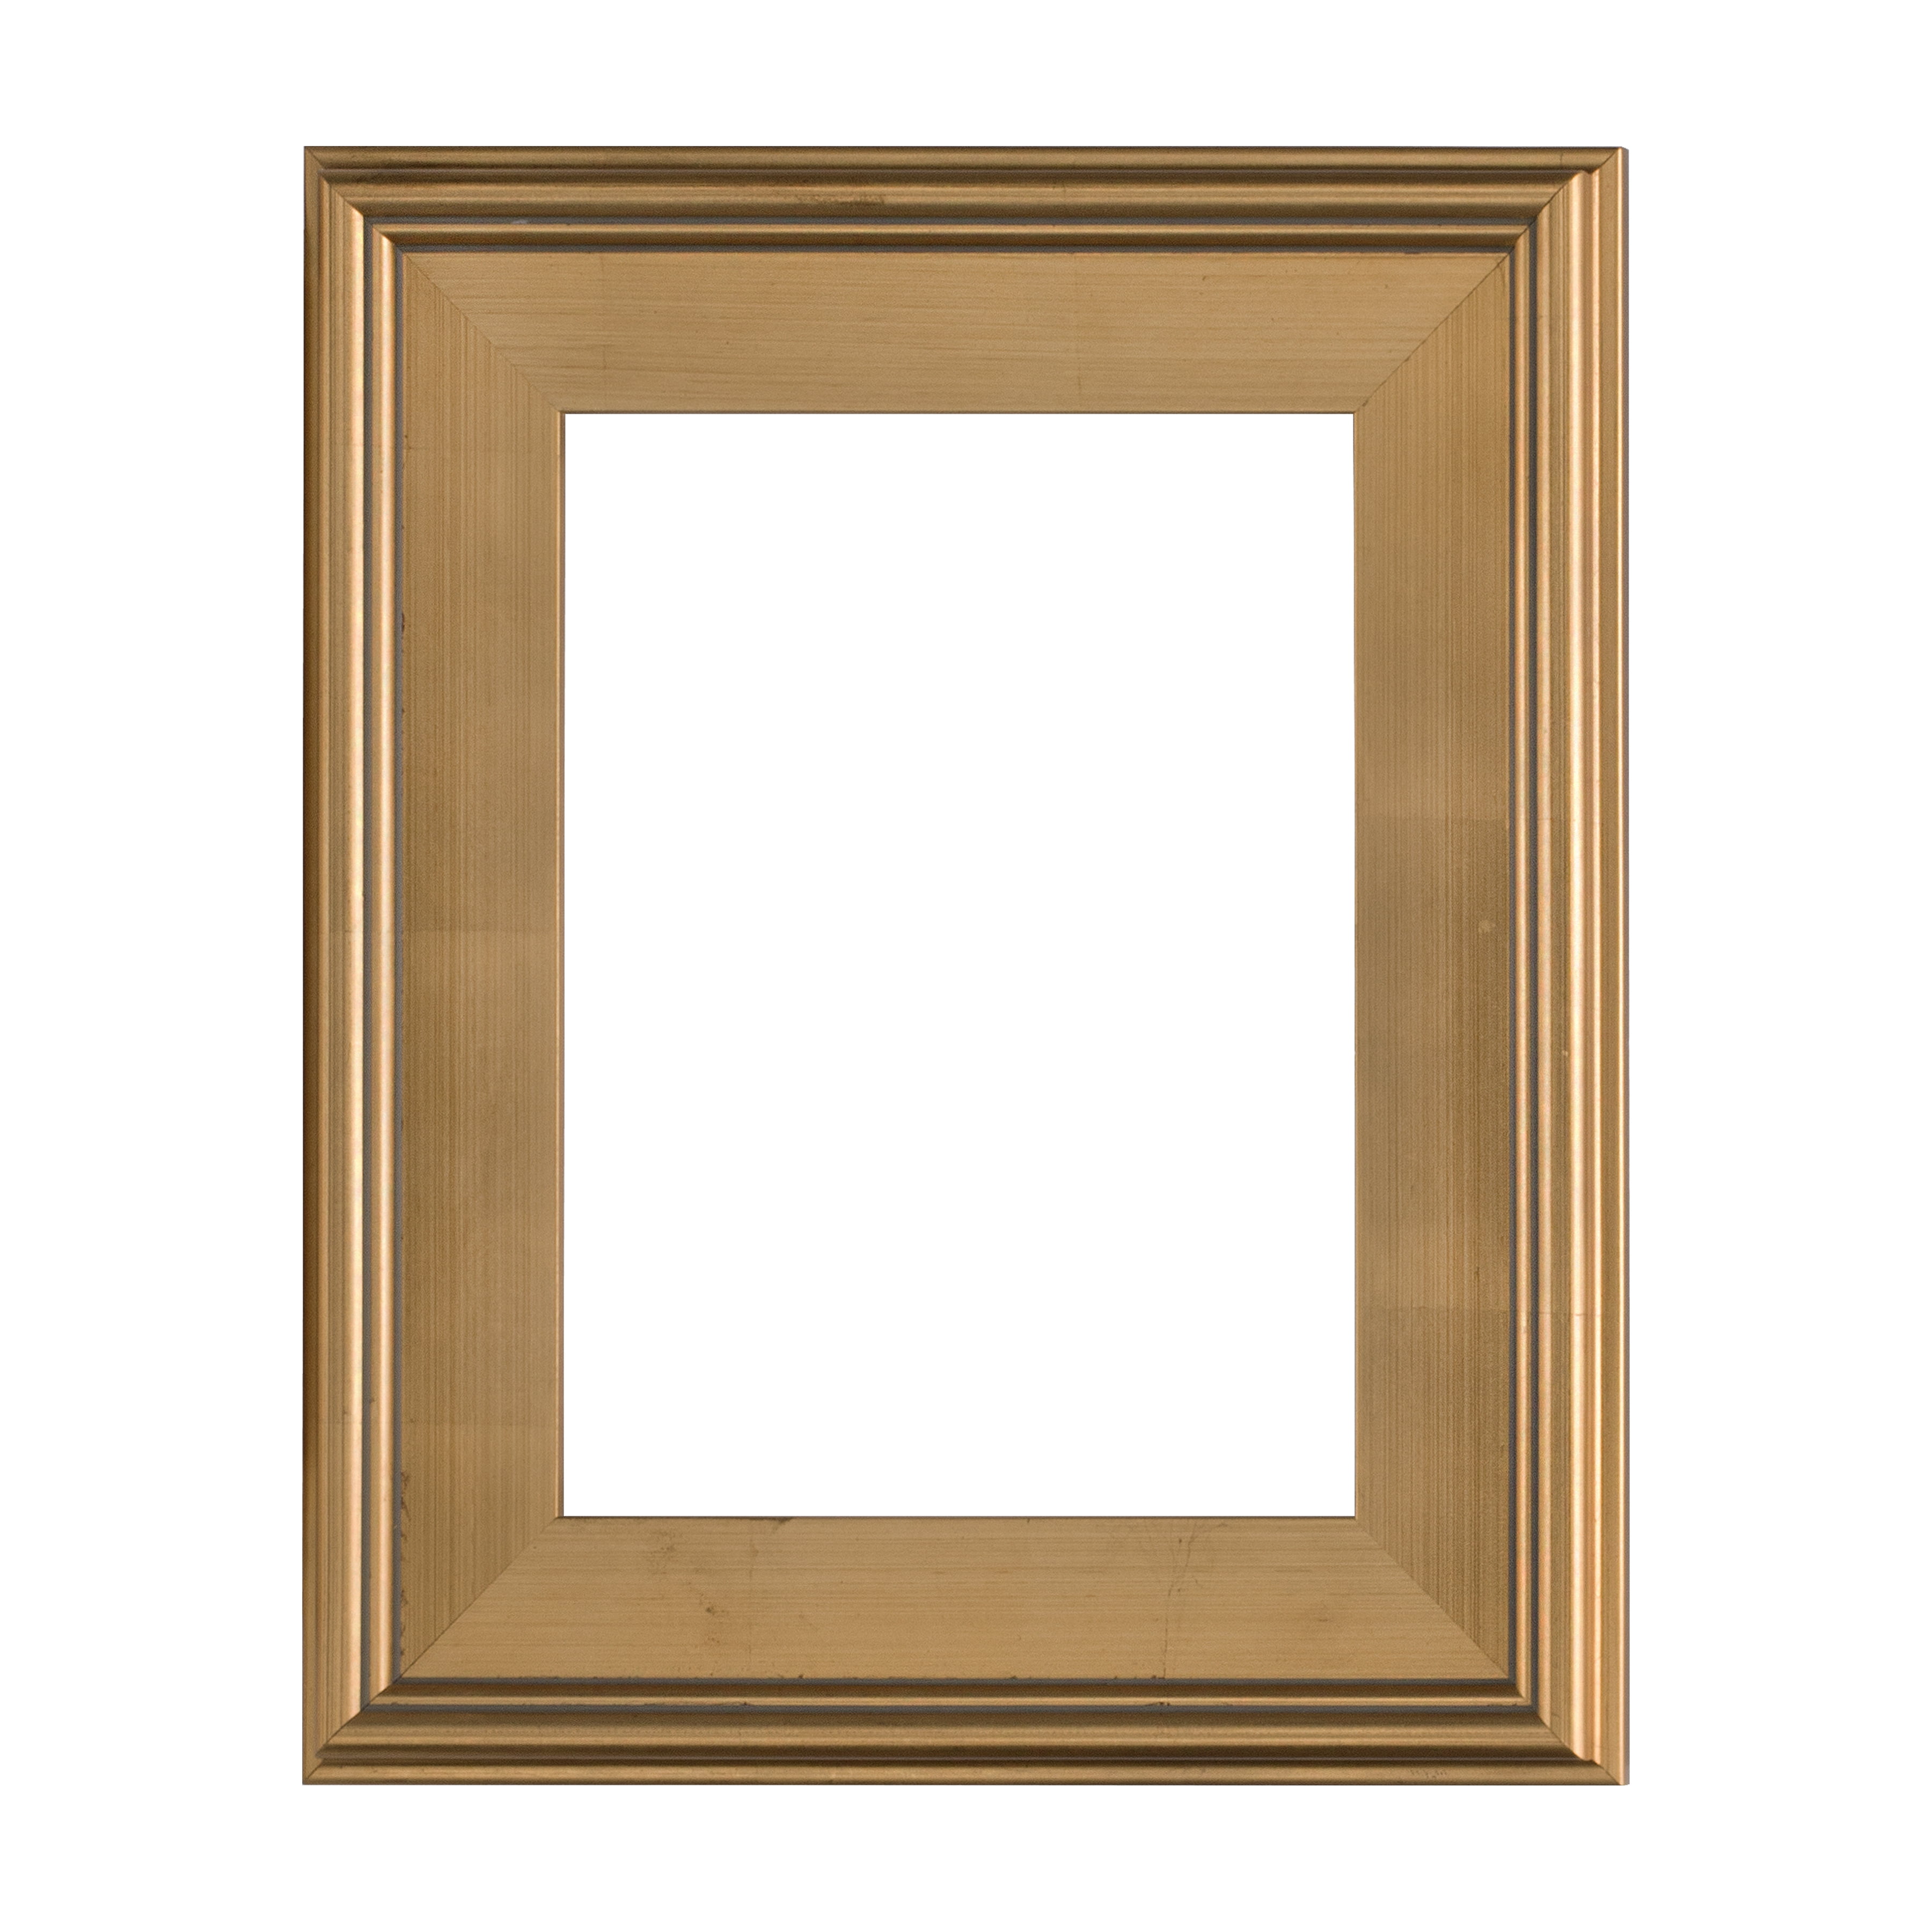 12"x16" CLASSIC MODERN PICTURE PAINTING FRAME PLEIN AIR WOOD GOLD 3" WIDE 12x16" 